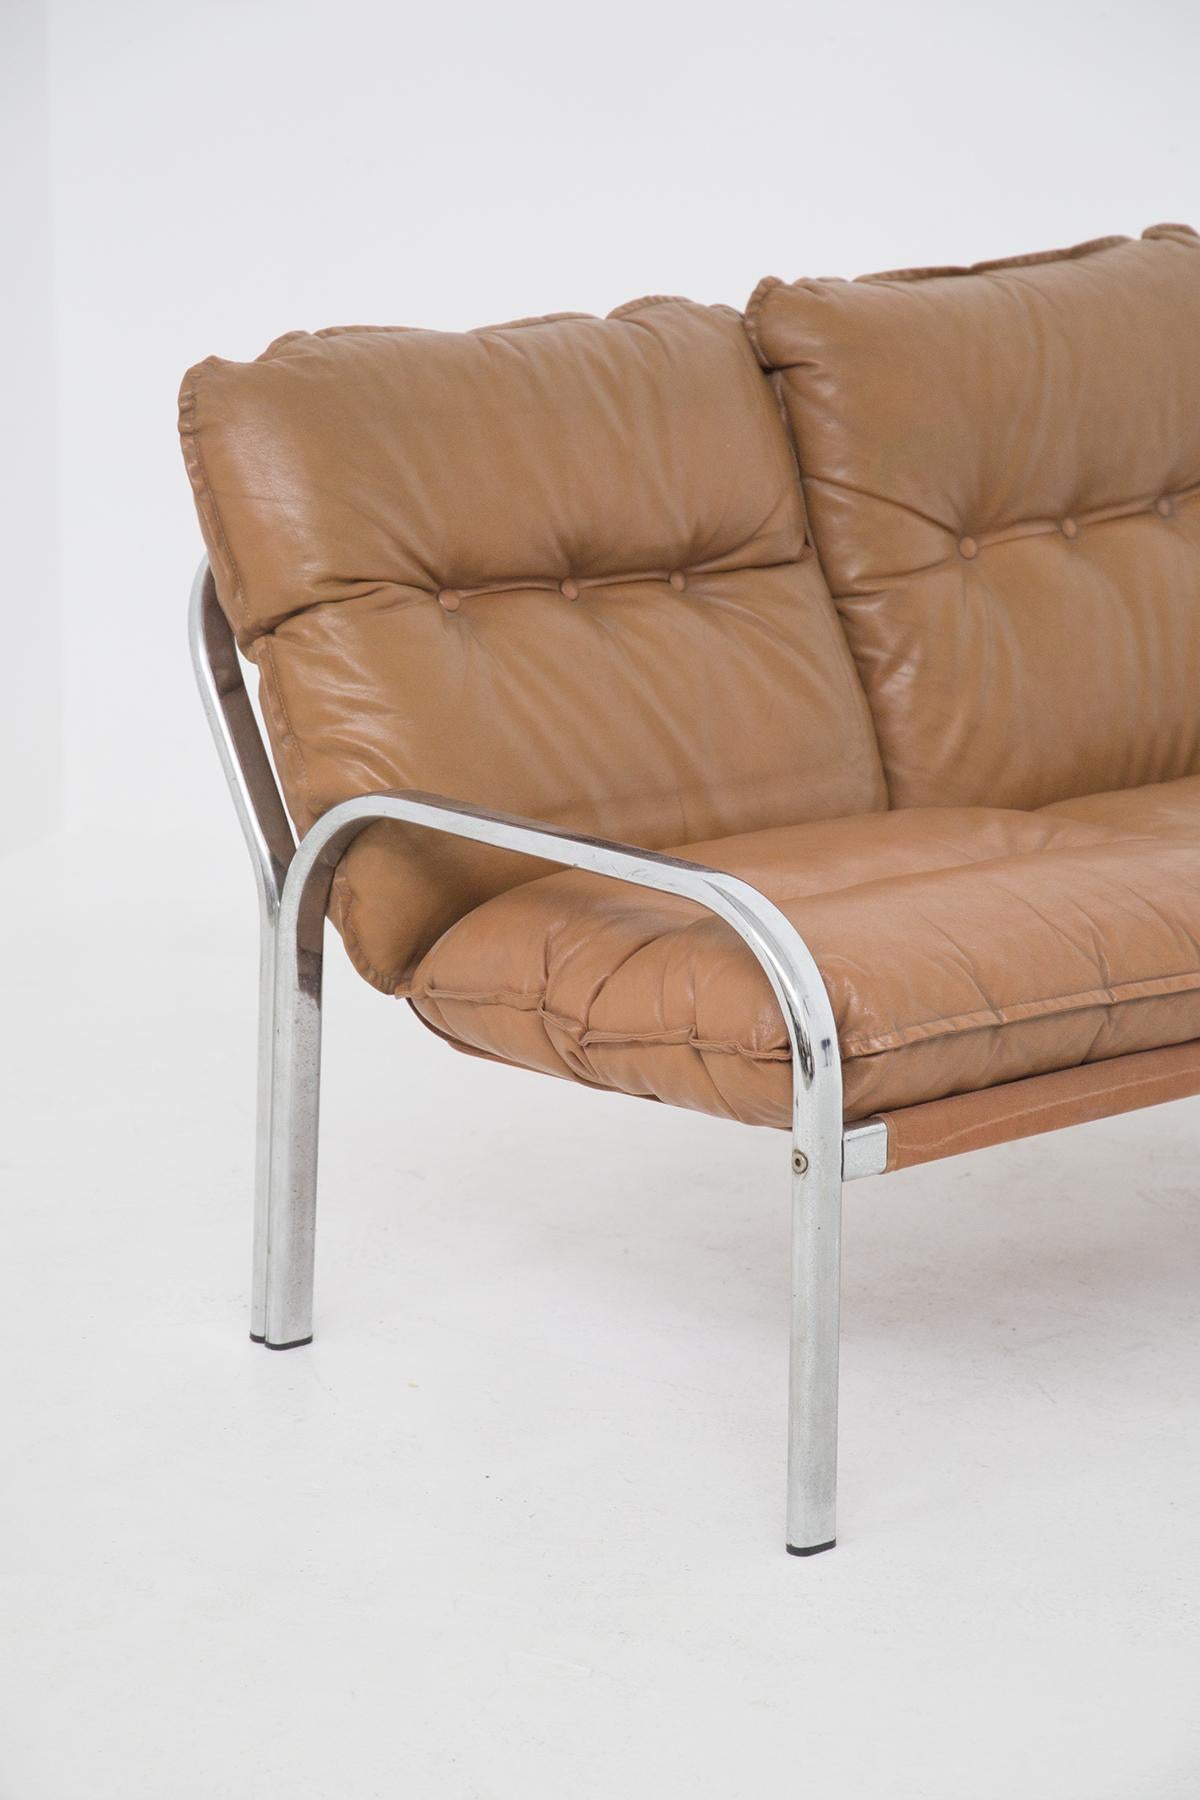 Two-seat leather sofa attributed to the magnificent designer Gae Aulenti, of fine Italian manufacture, from the Space Age period.
The sofa has a supporting structure totally made of steel. The 4 supporting legs are connected to each other in pairs